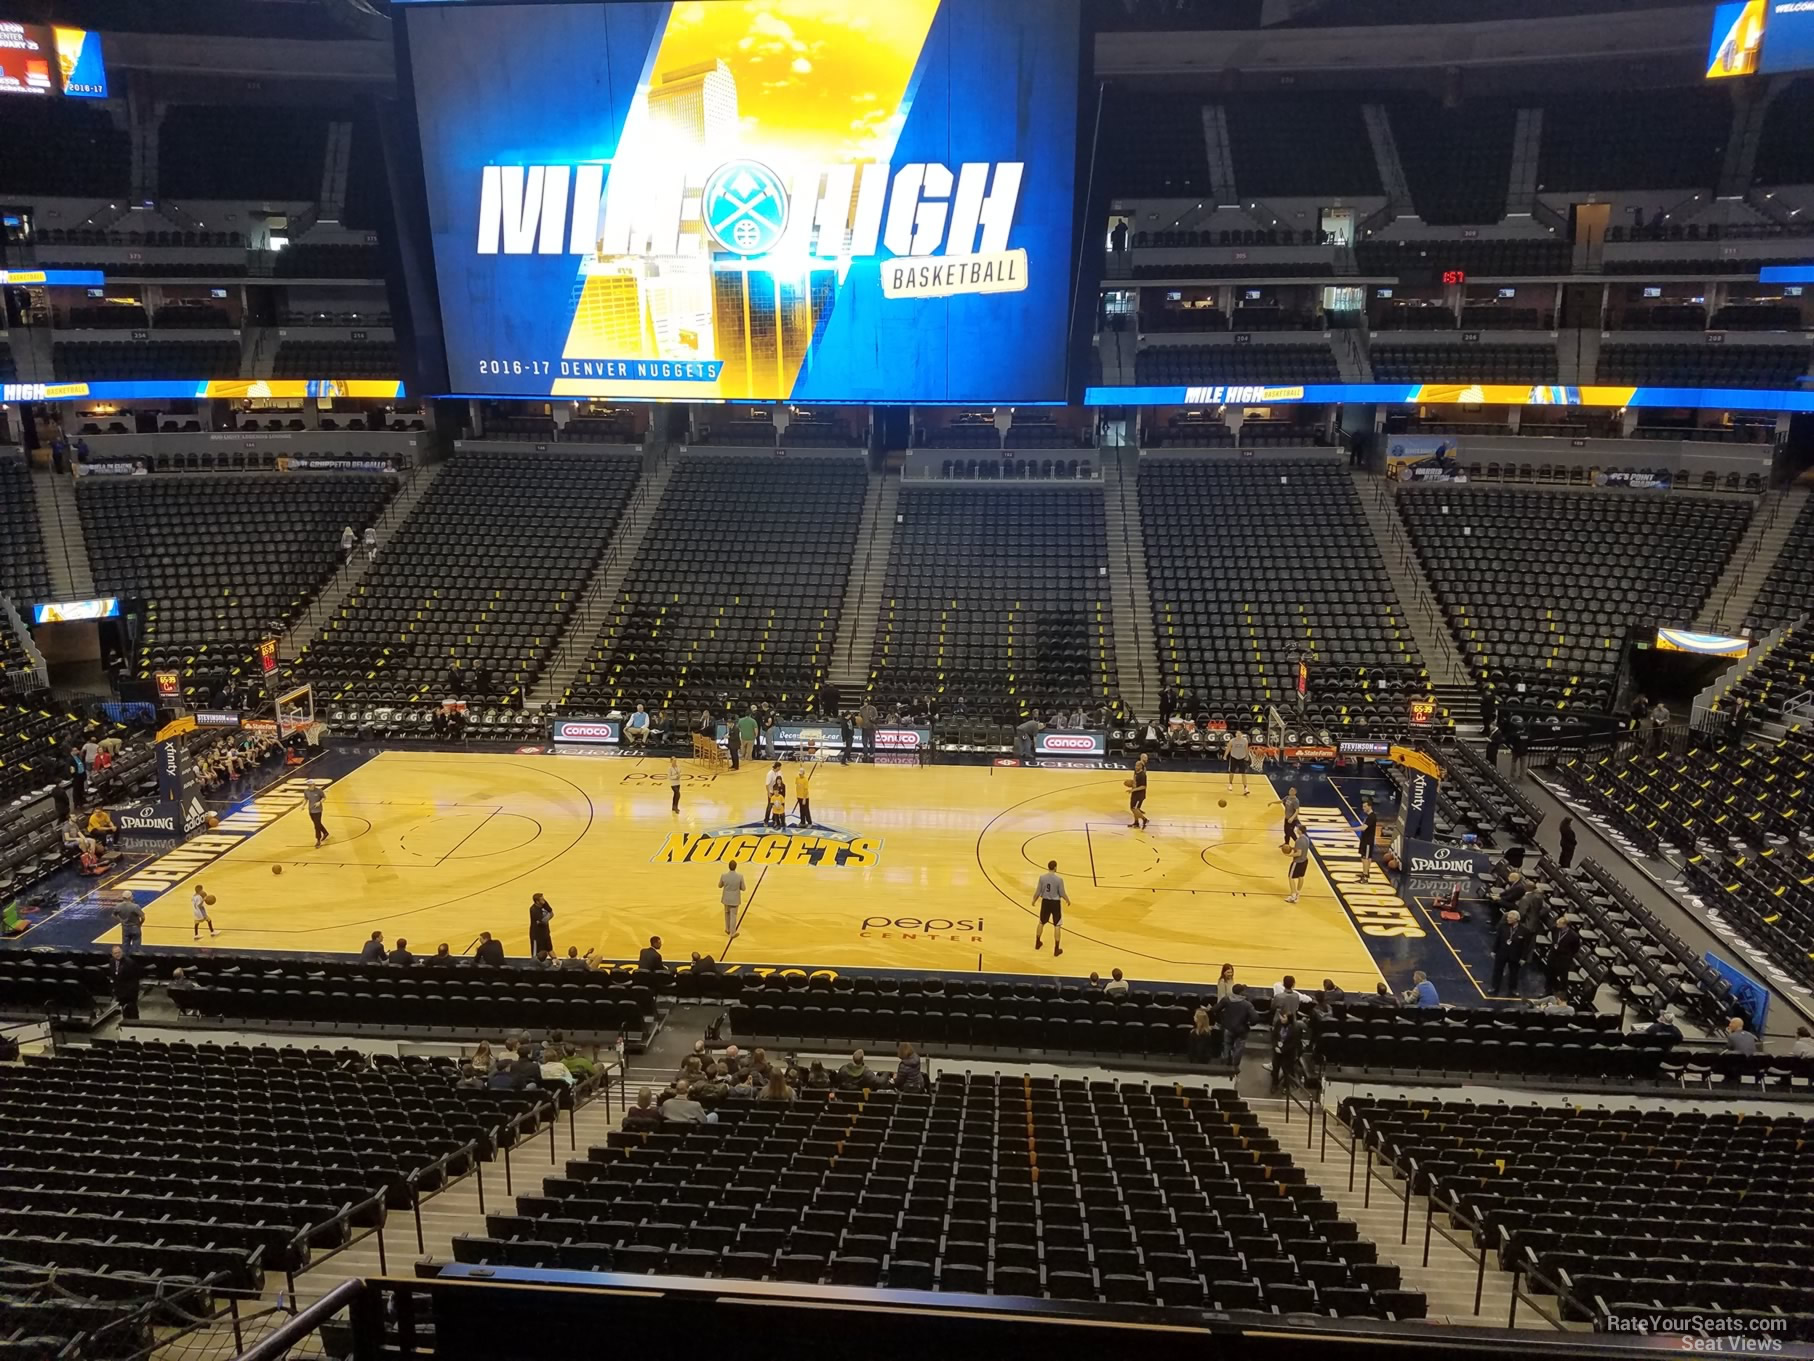 section 230, row 4 seat view  for basketball - ball arena